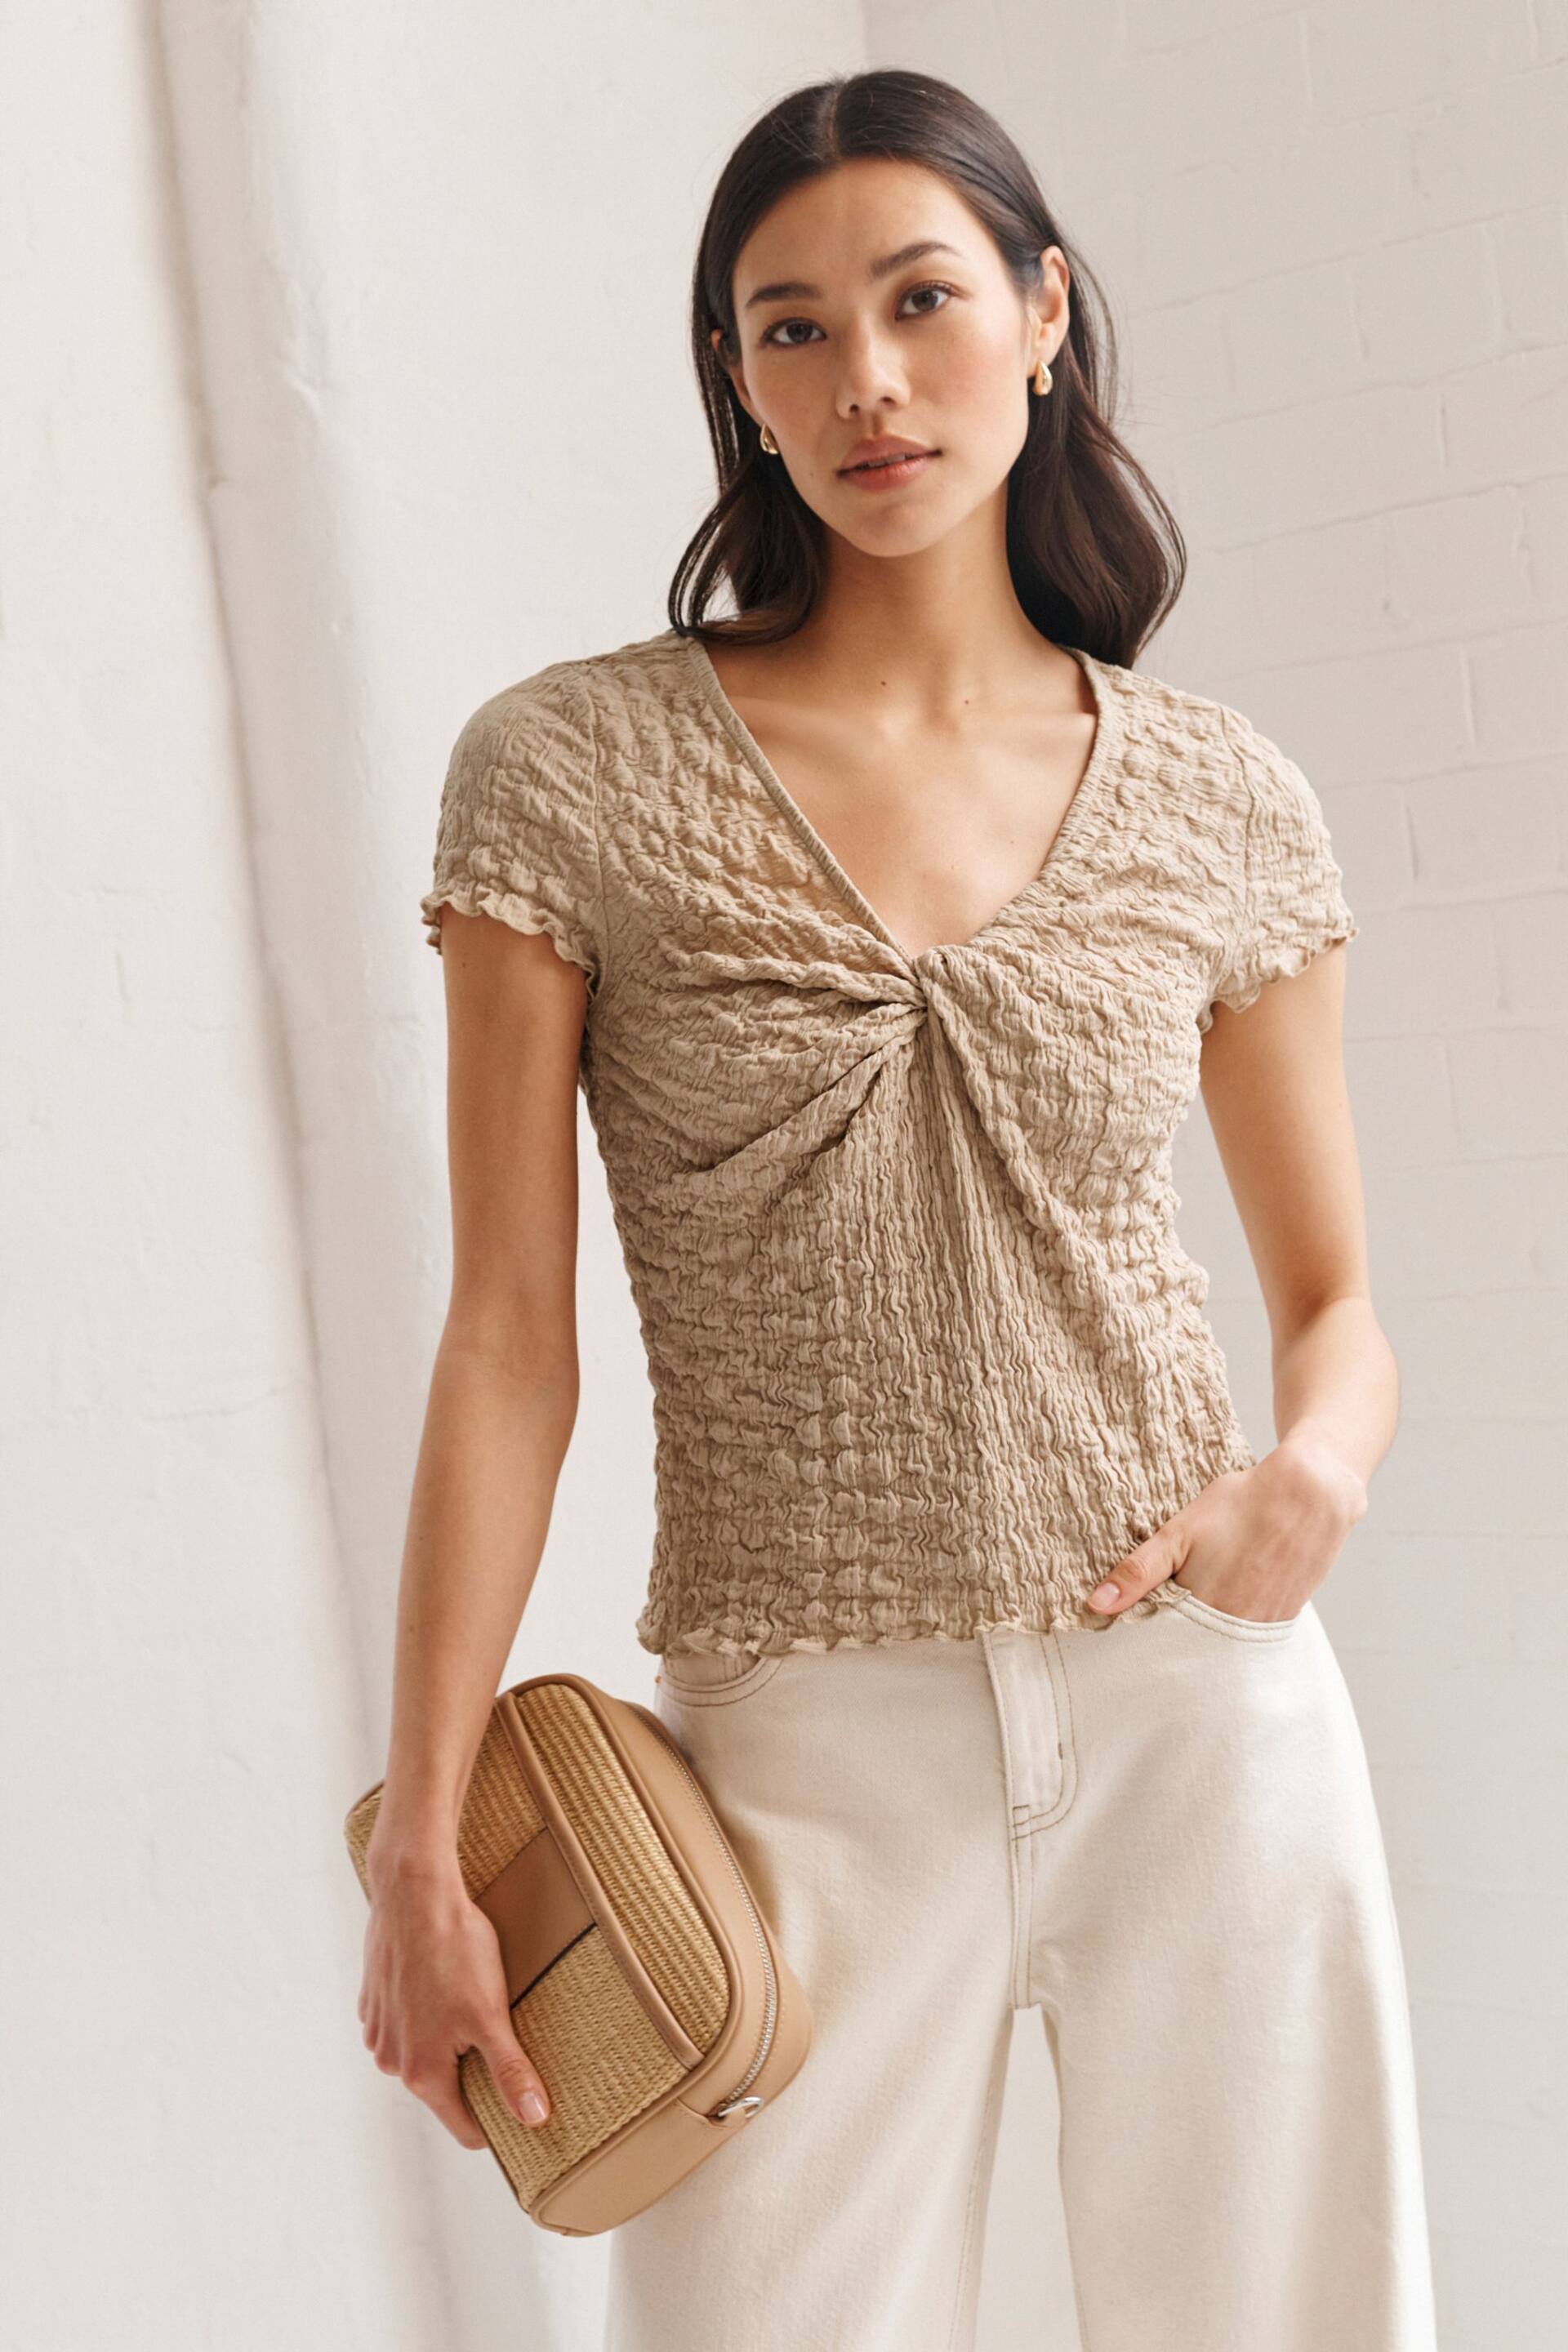 Neutral Textured Twist Front Short Sleeve Top - Image 2 of 7